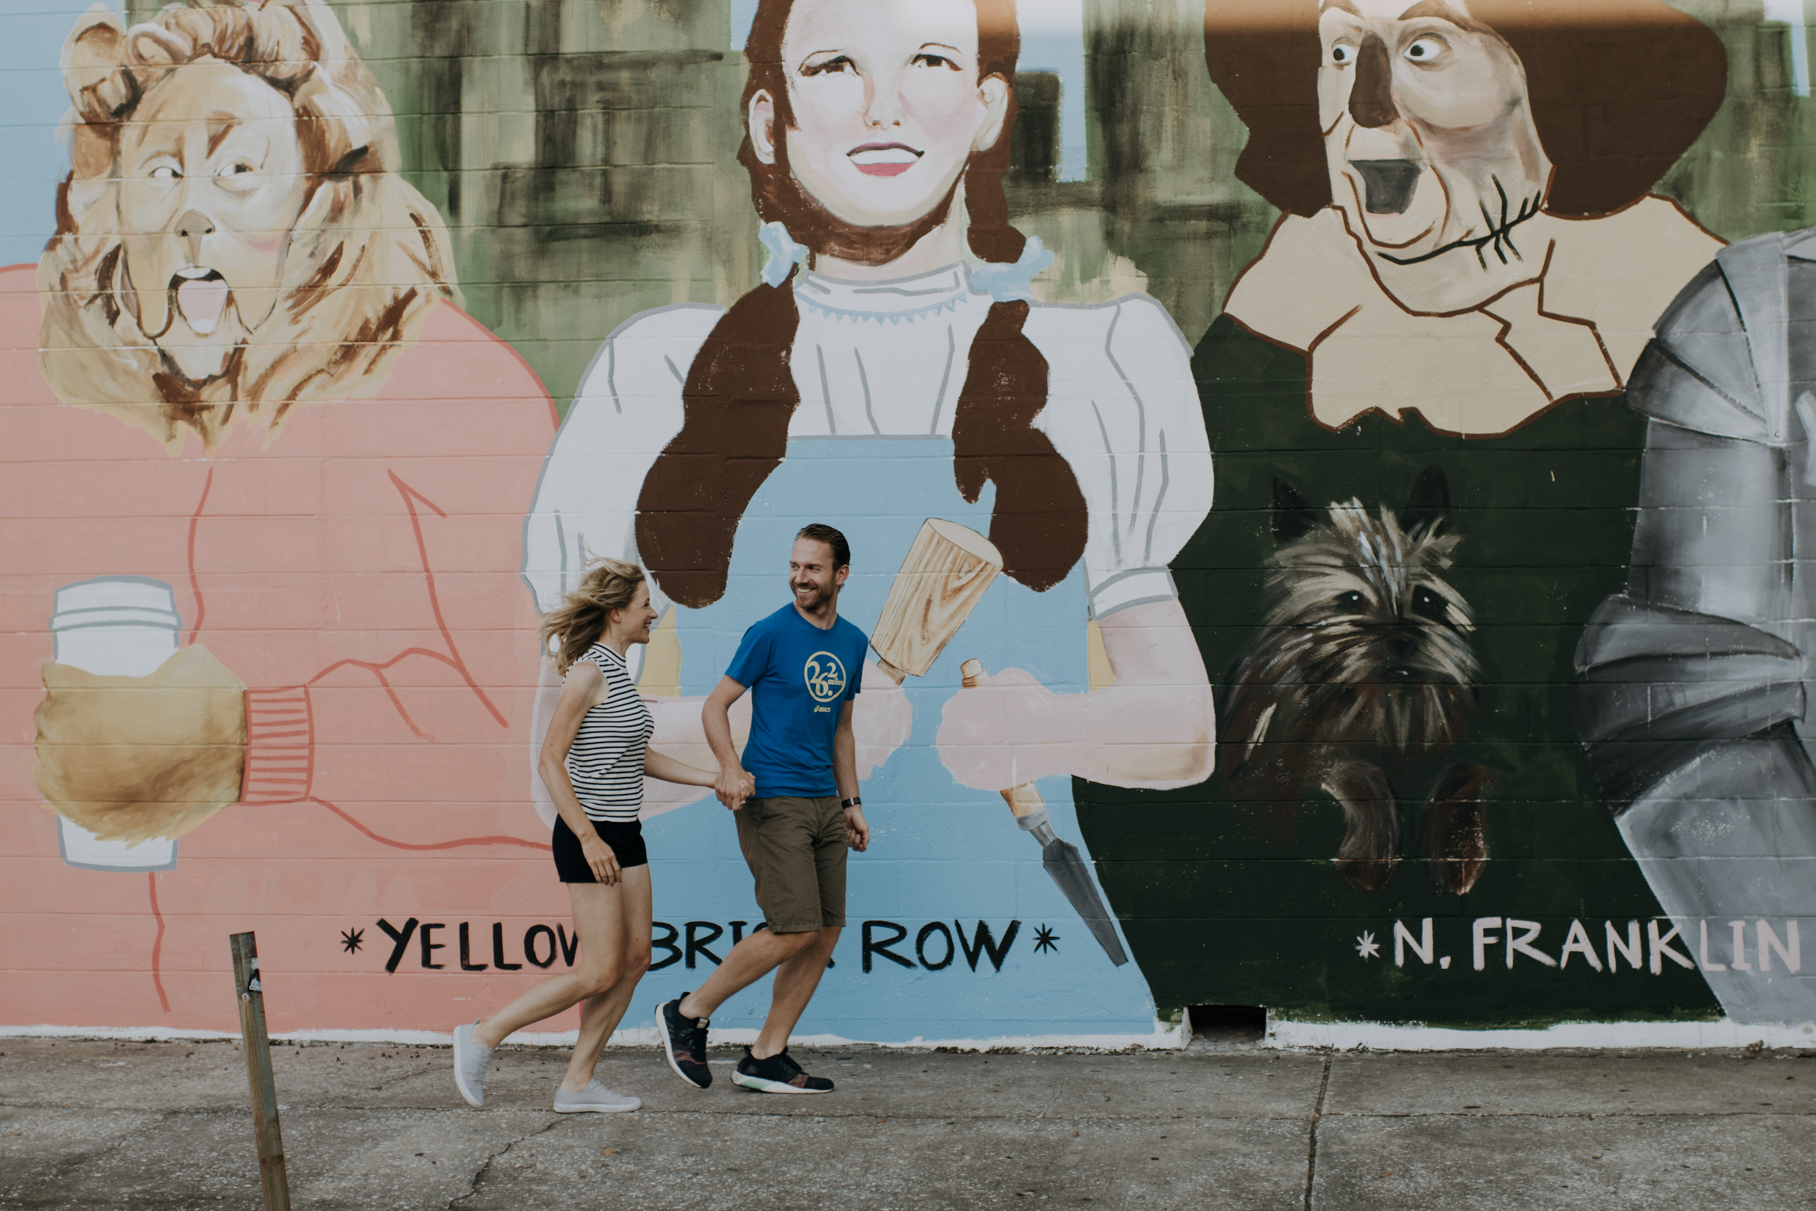 tampa mural shoot | freehearted film co | tampa wedding photography | tampa wedding photographer